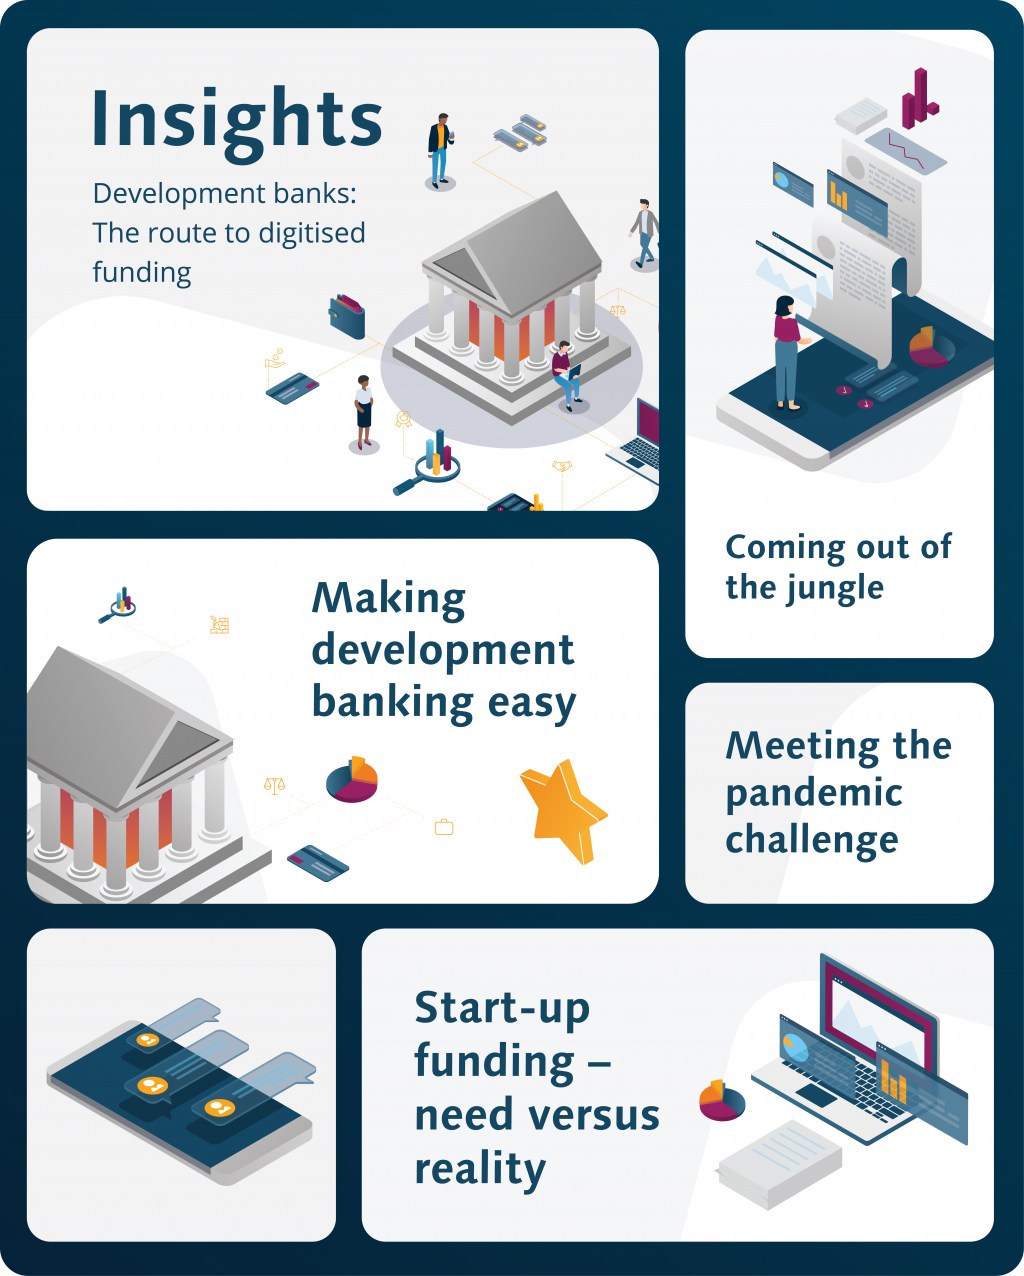 Insights Special Issue November 2021: Development Banks